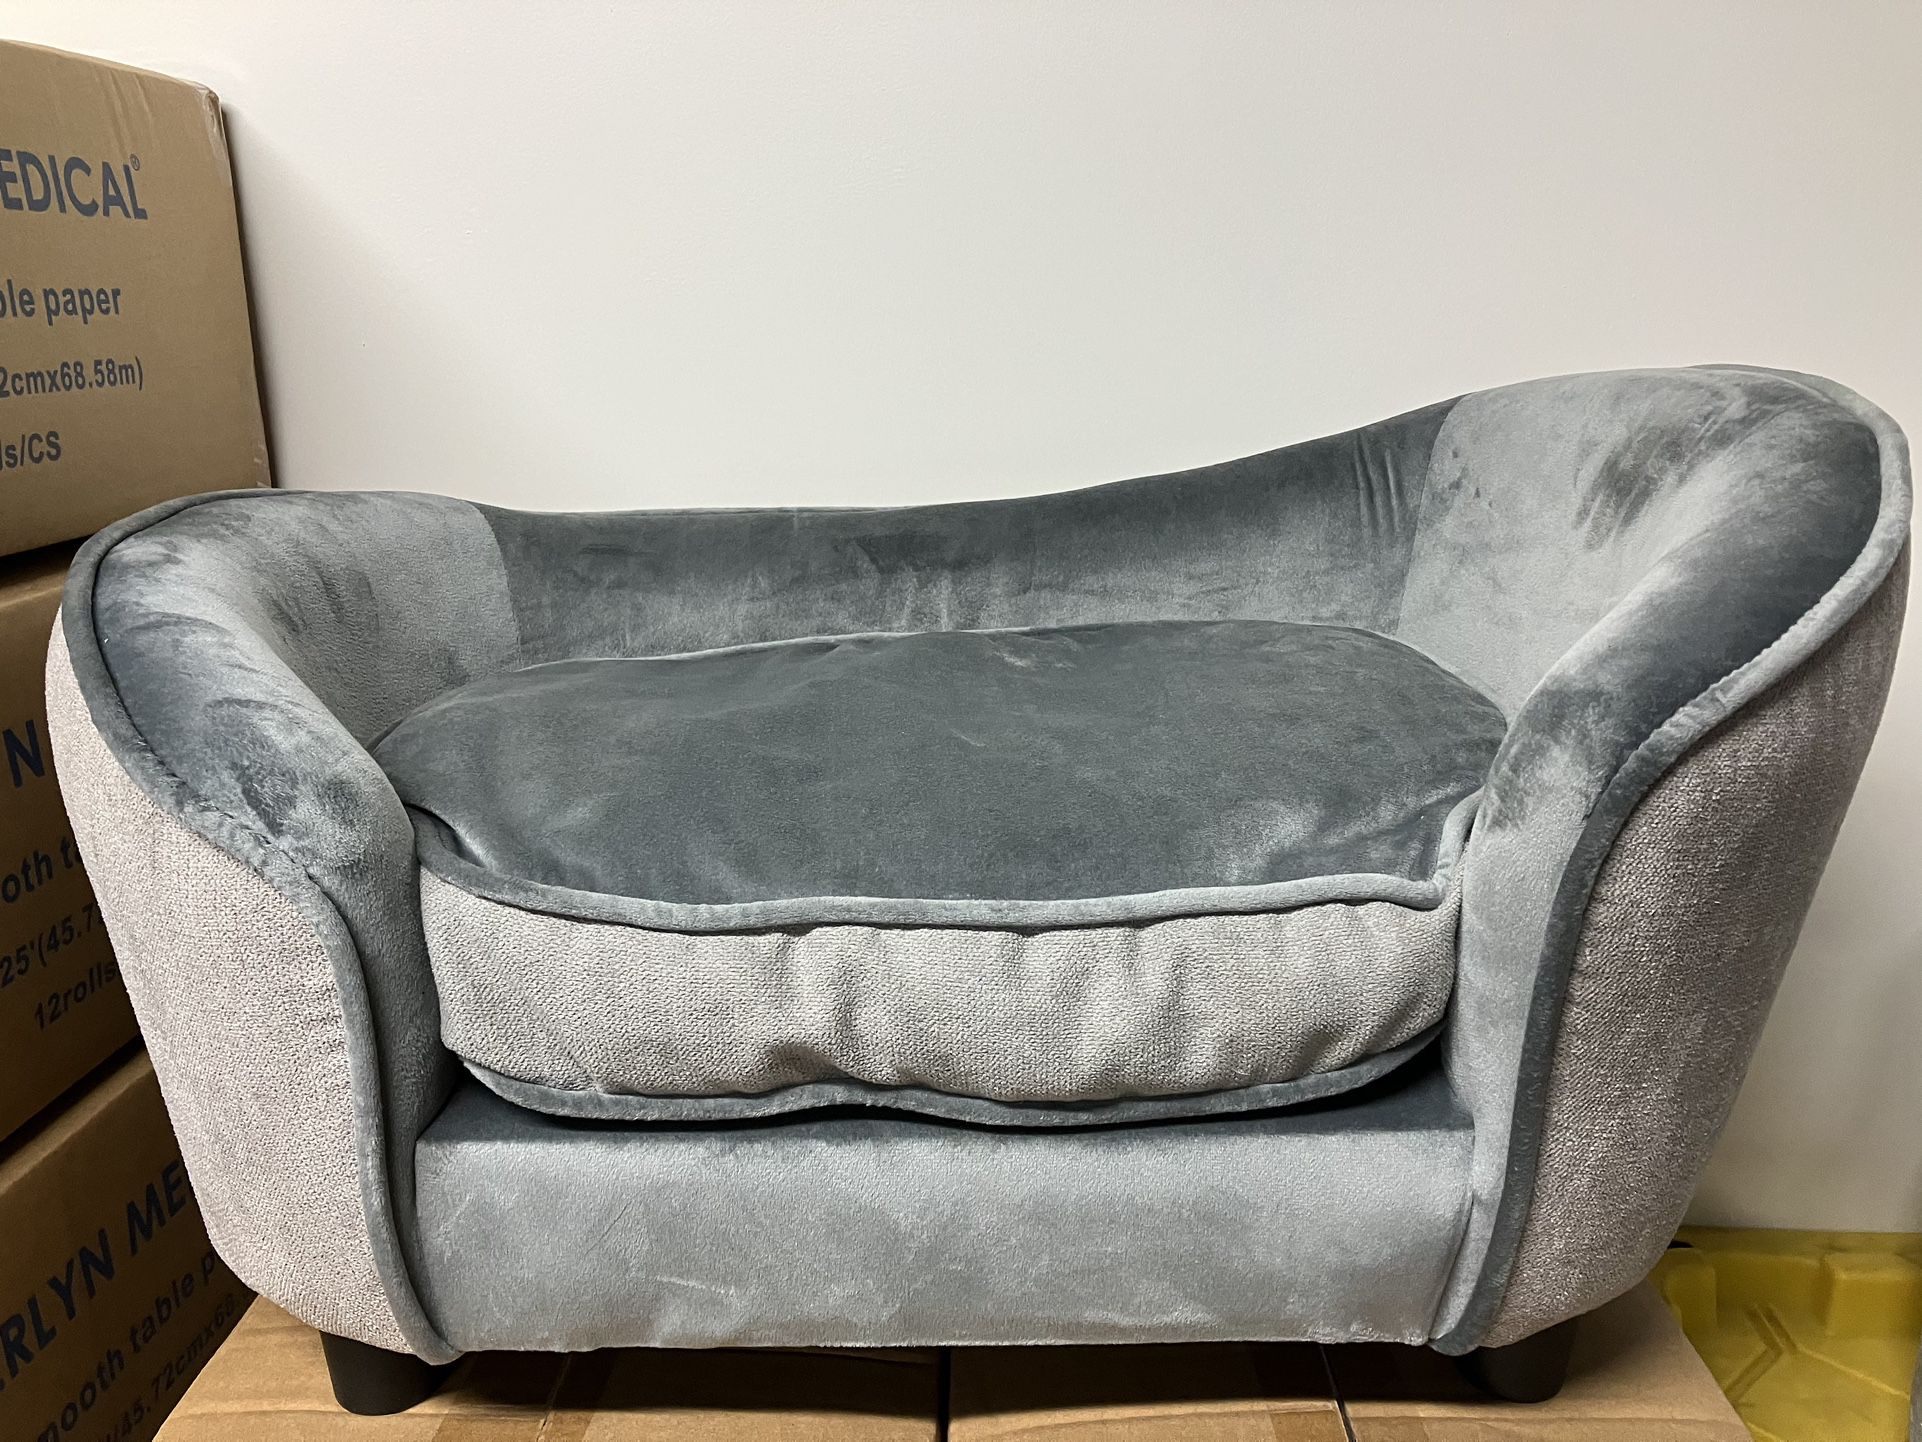 Small dog Puppy Bed Couch Lounger Grey Suede 